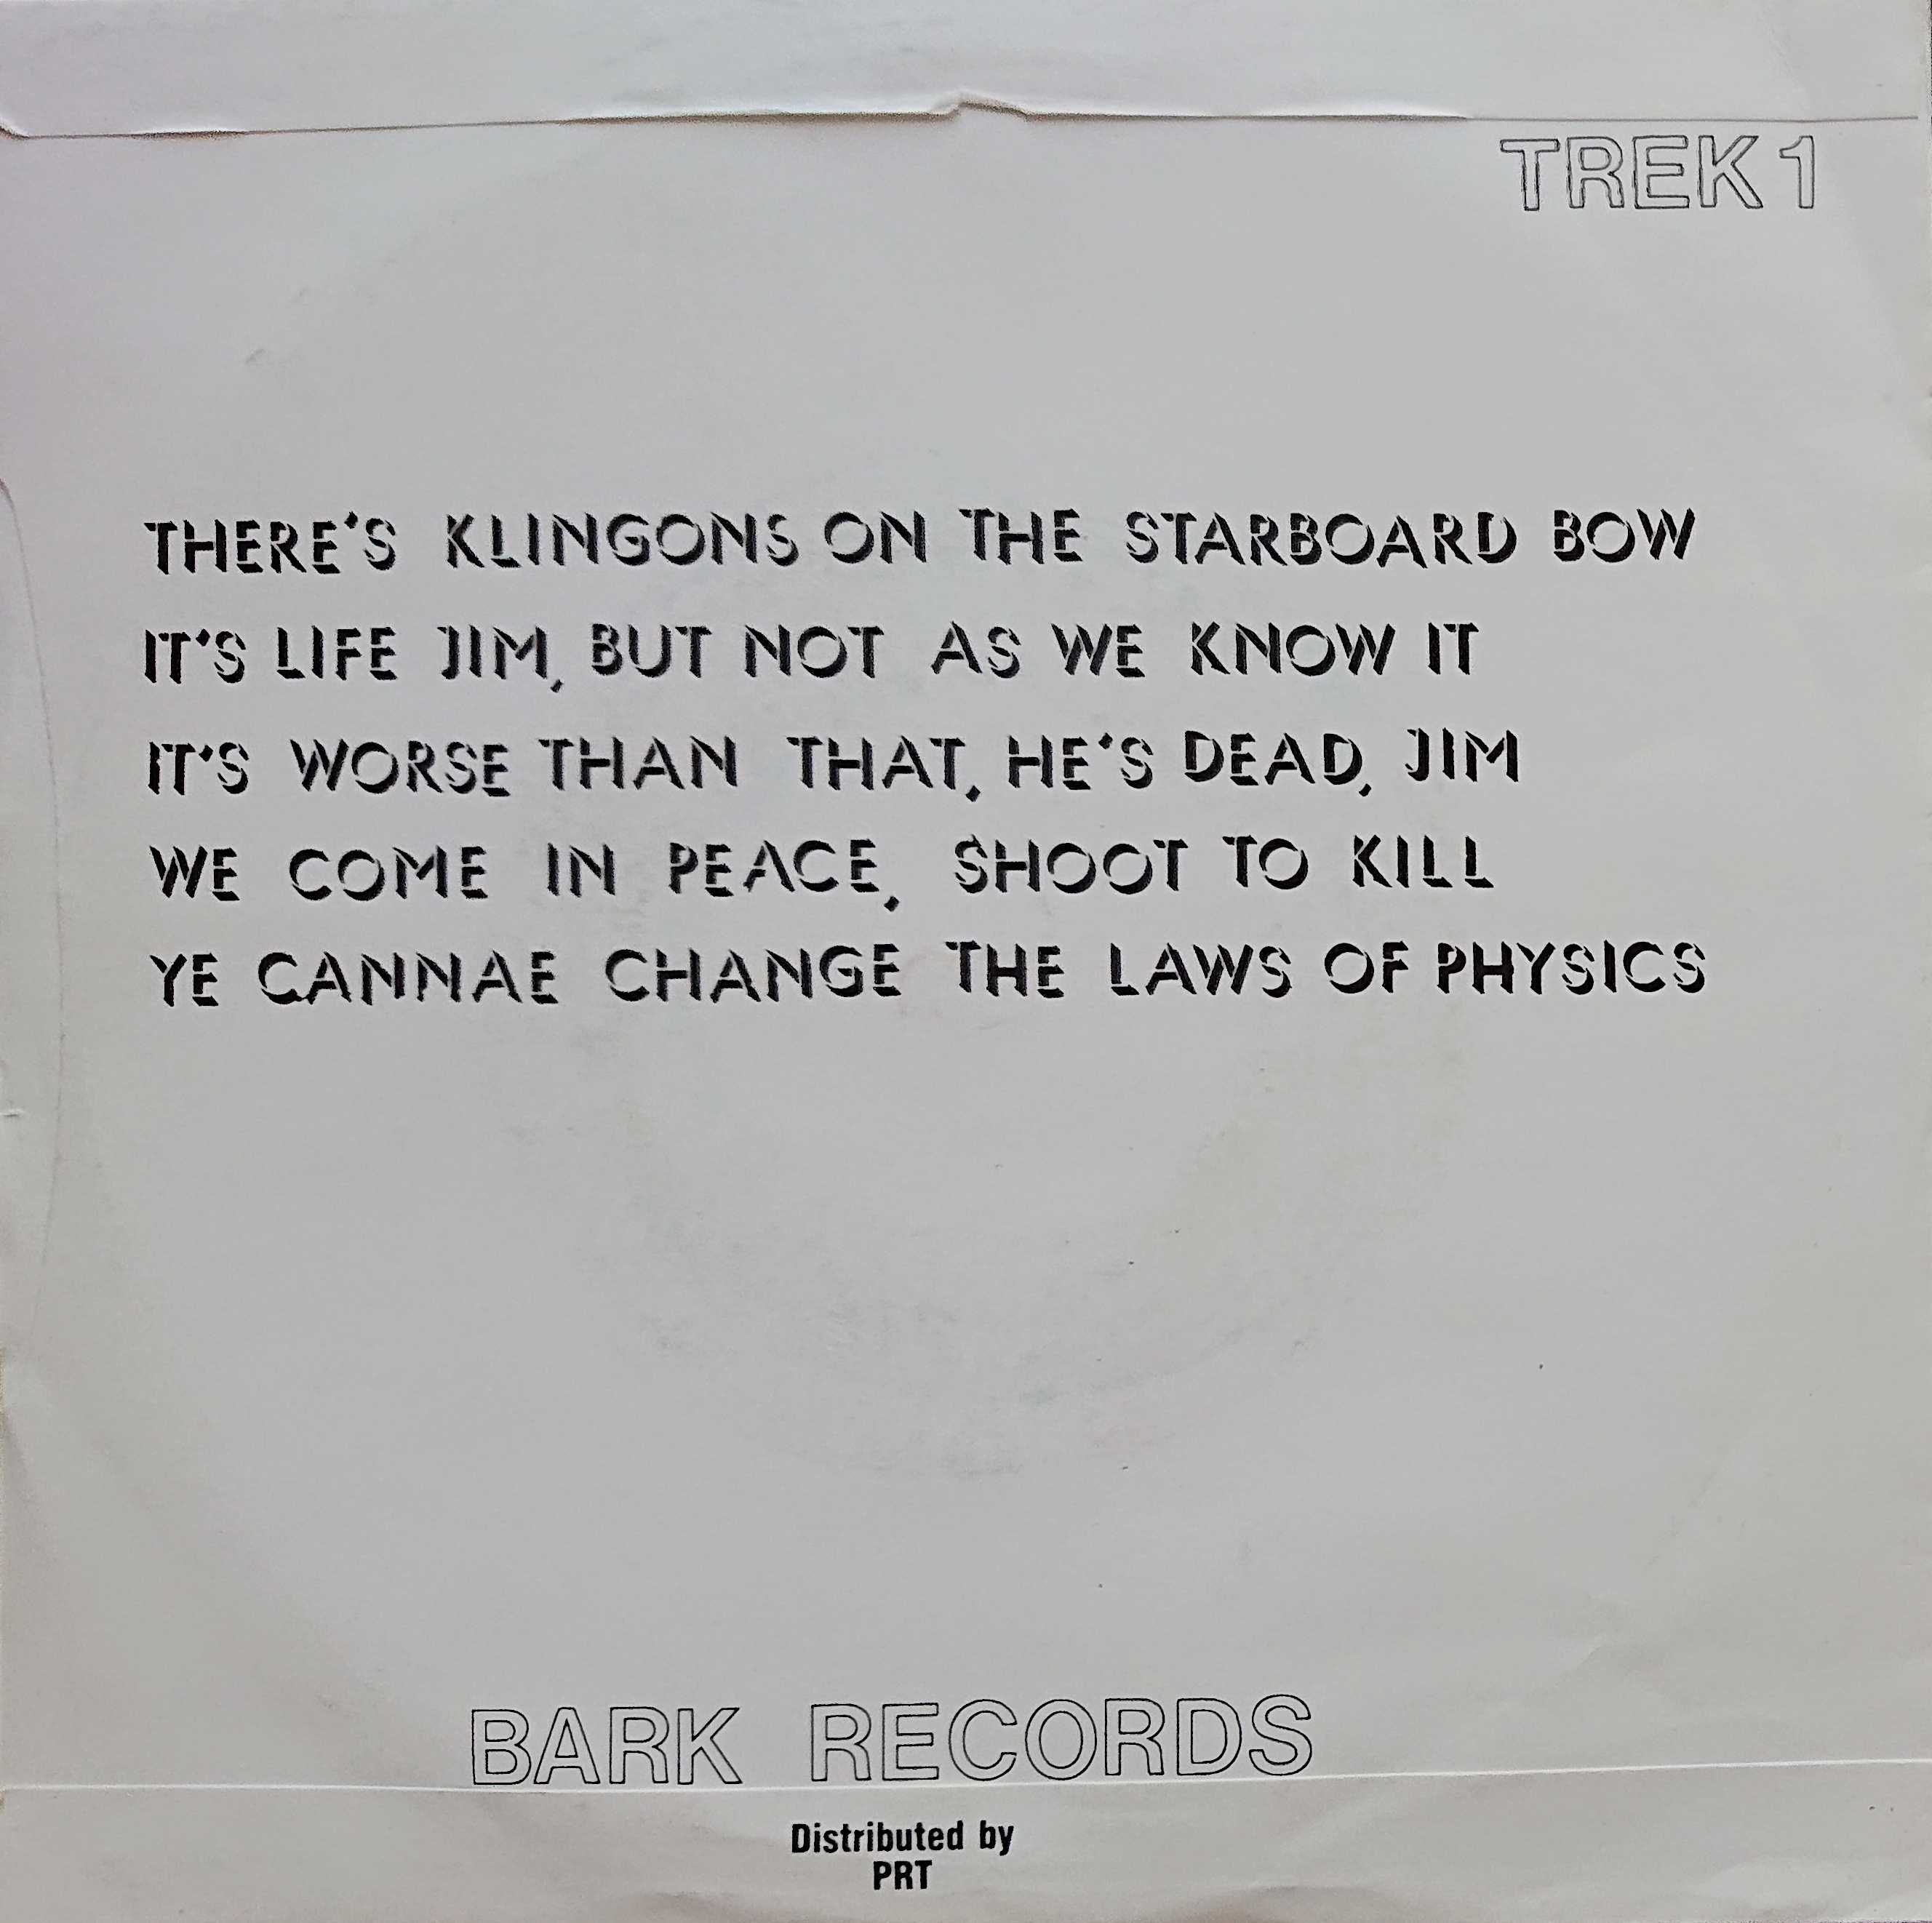 Picture of TREK 1 Star trekkin' by artist Lister / O'Connor / The Firm from the BBC records and Tapes library